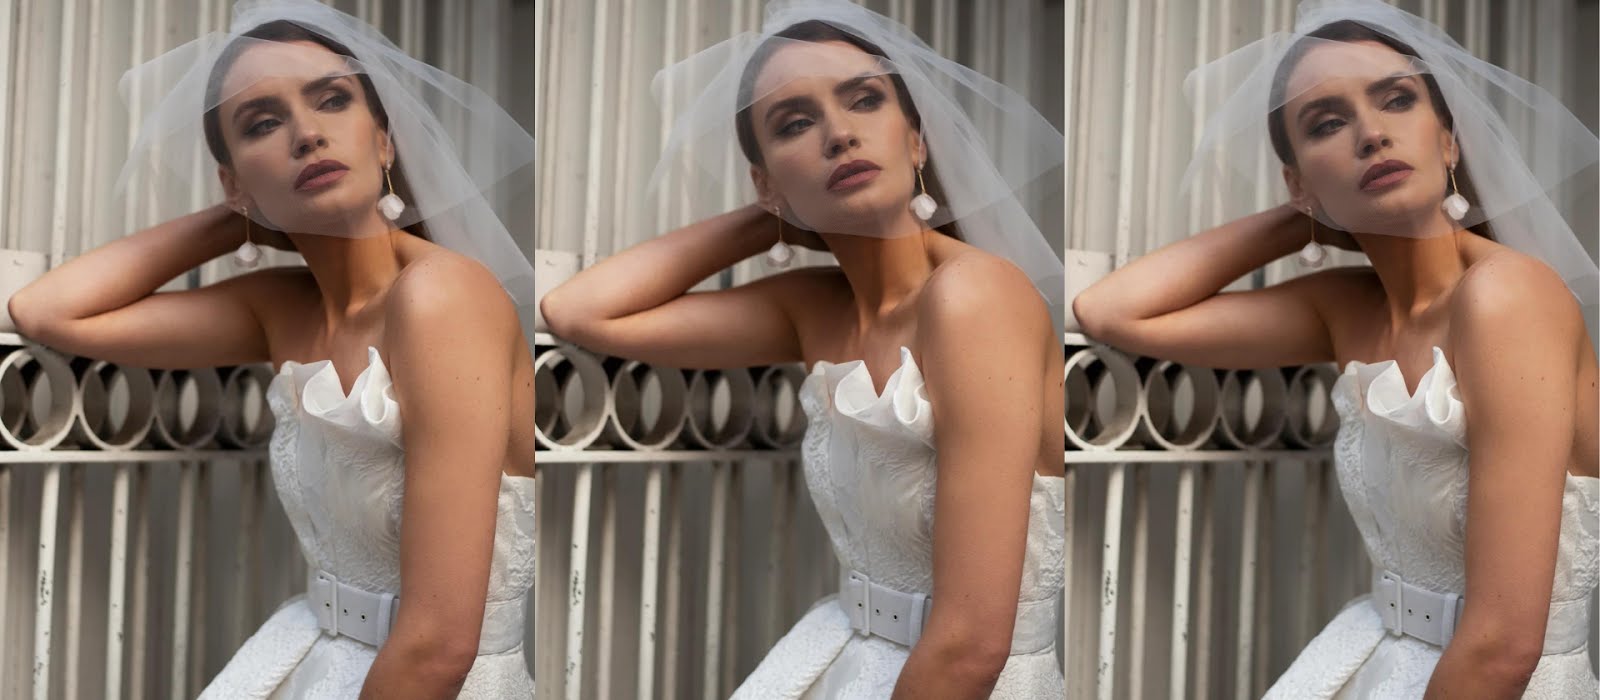 7 Irish jewellery designers with exquisite bridal collections